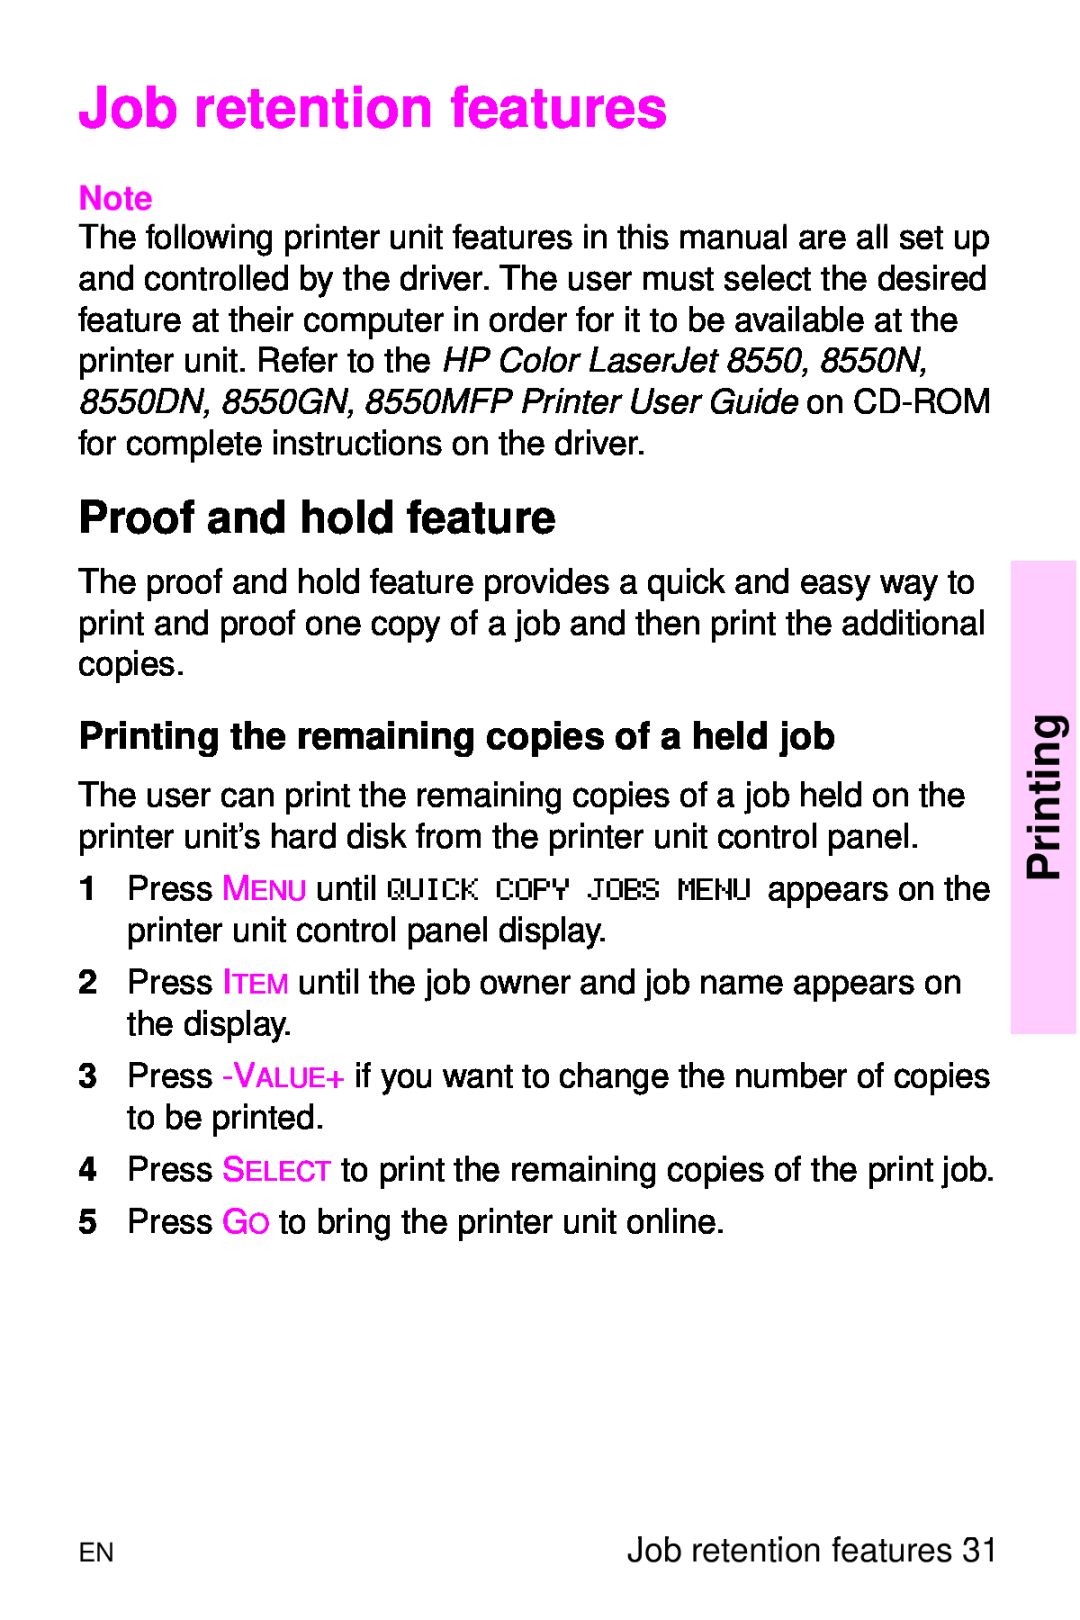 HP 8000 s manual Job retention features, Proof and hold feature, Printing the remaining copies of a held job 